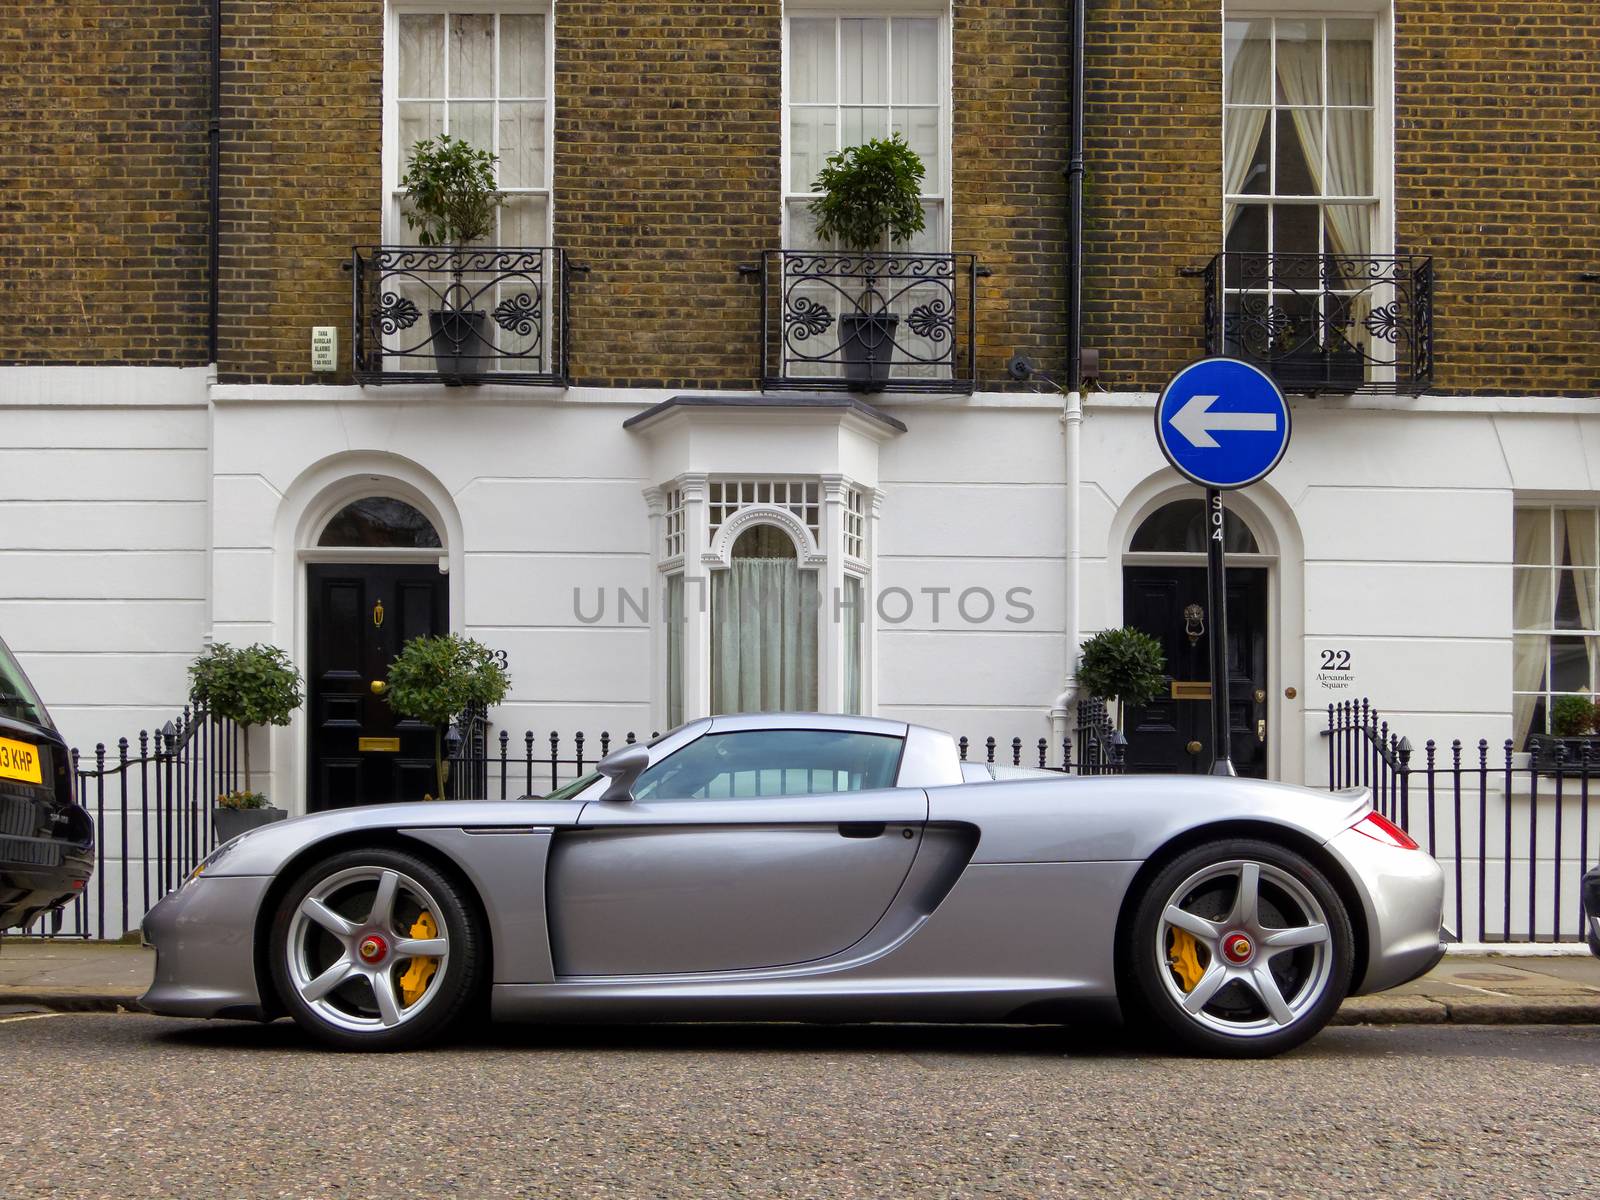 LONDON, UK - CIRCA MARCH 2013: A Porsche Carrera GT parked in the street. The Carrera GT is a mid-engined sportscar produced between 2004 and 2007.